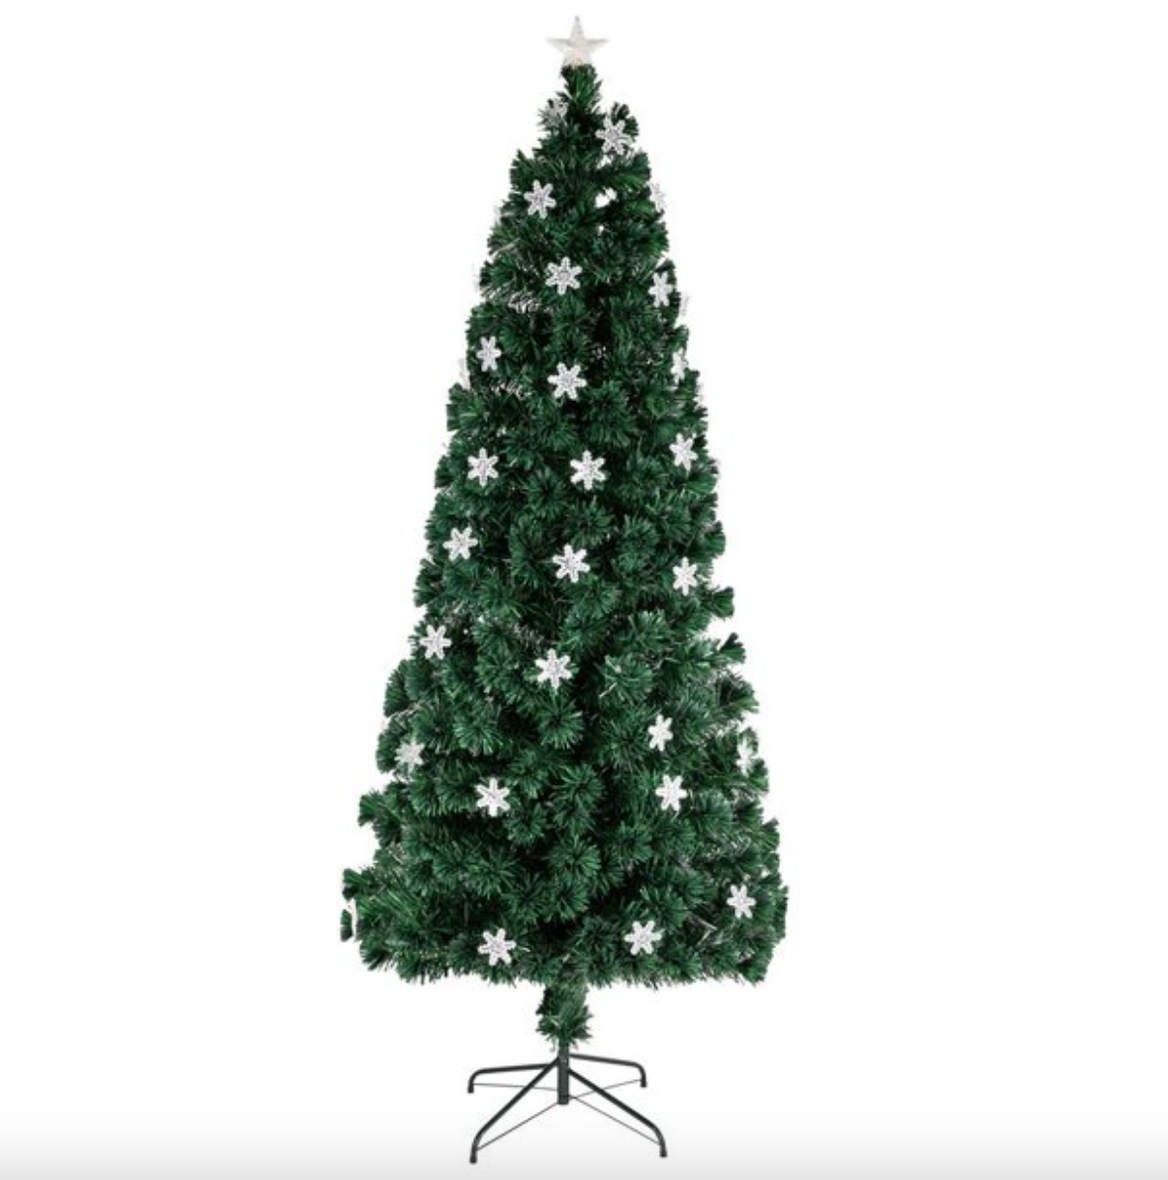 1.8m Christmas Tree With Built-In LED Lights And Fiber Optics